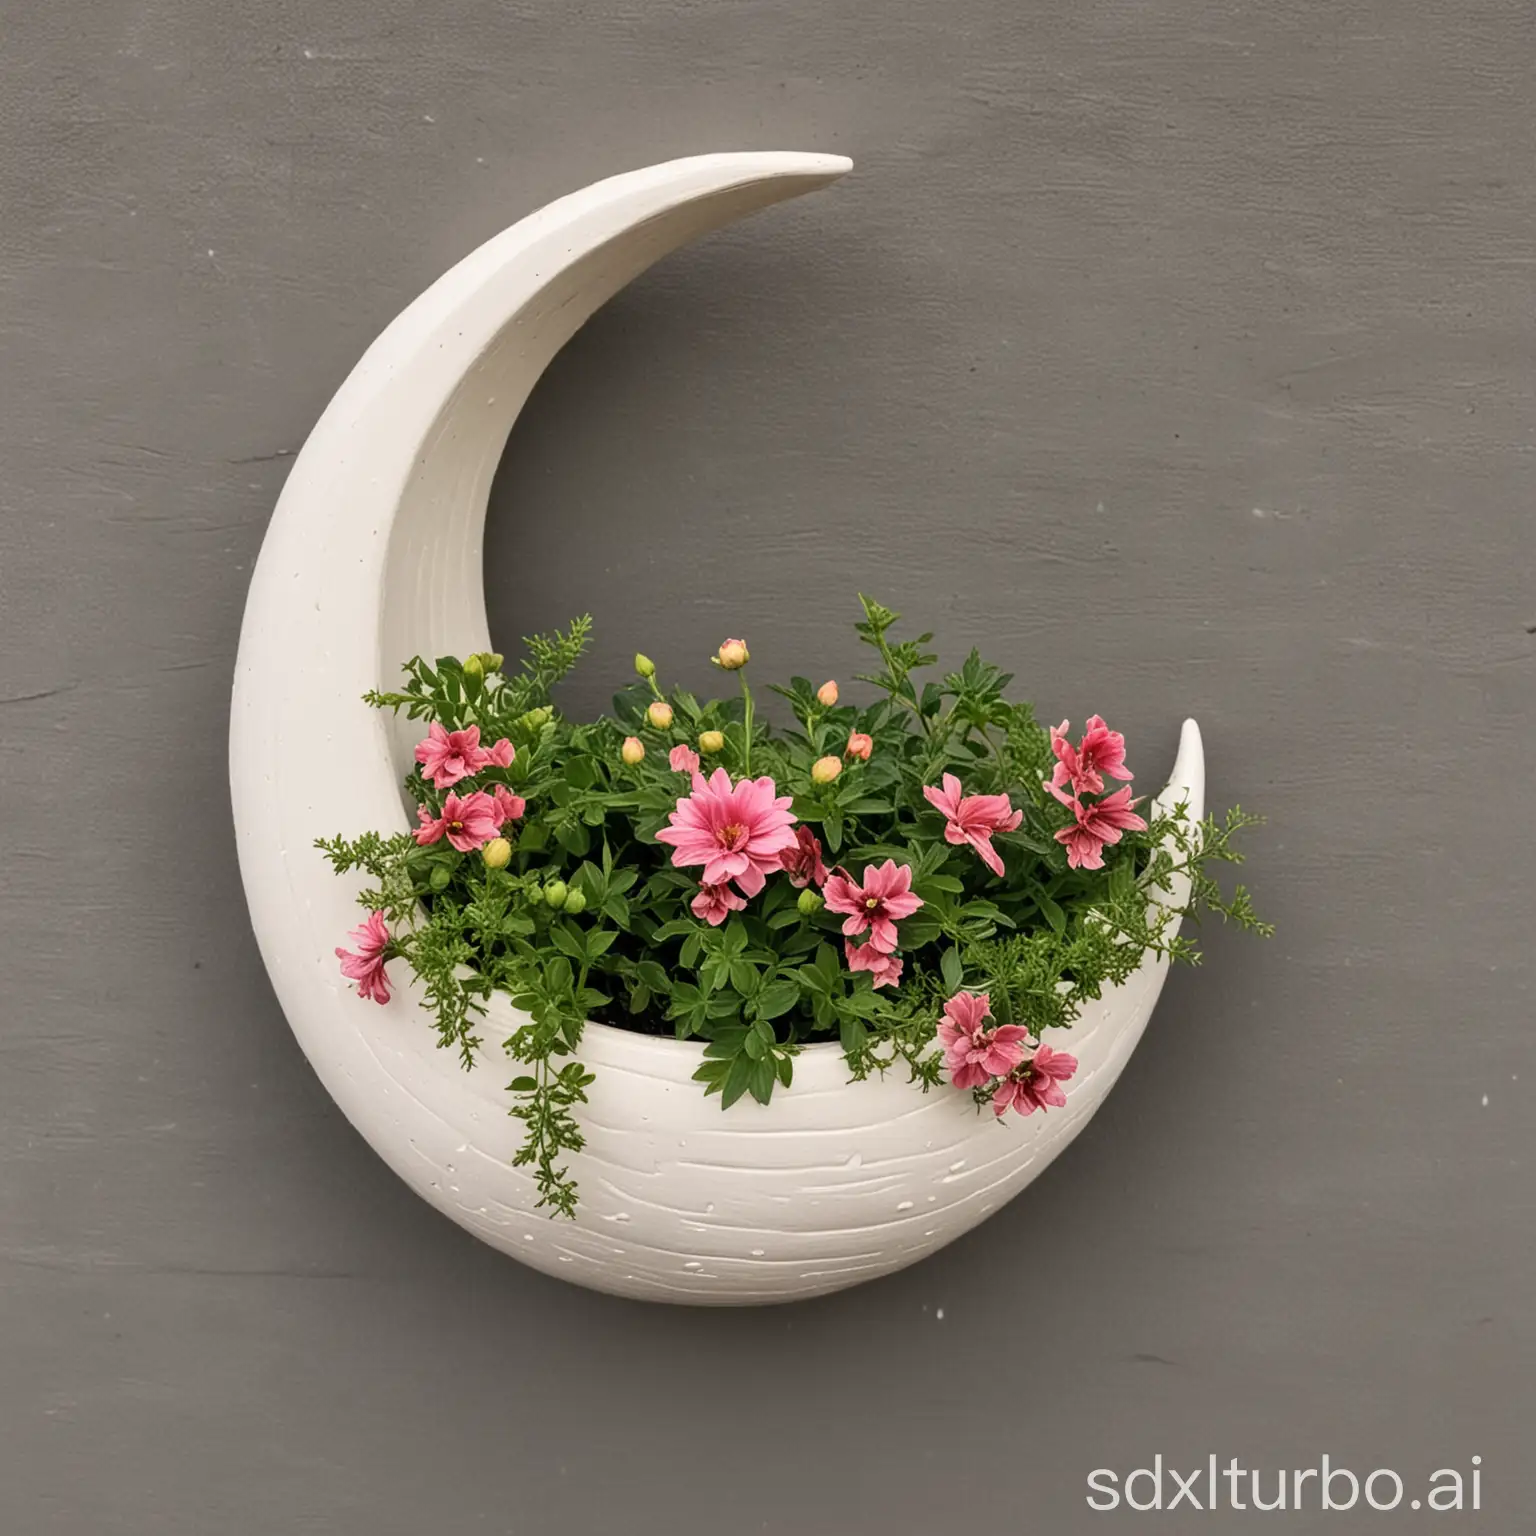 Elegant-Crescent-Moon-Shaped-Flower-Pot-with-Blossoming-Flowers